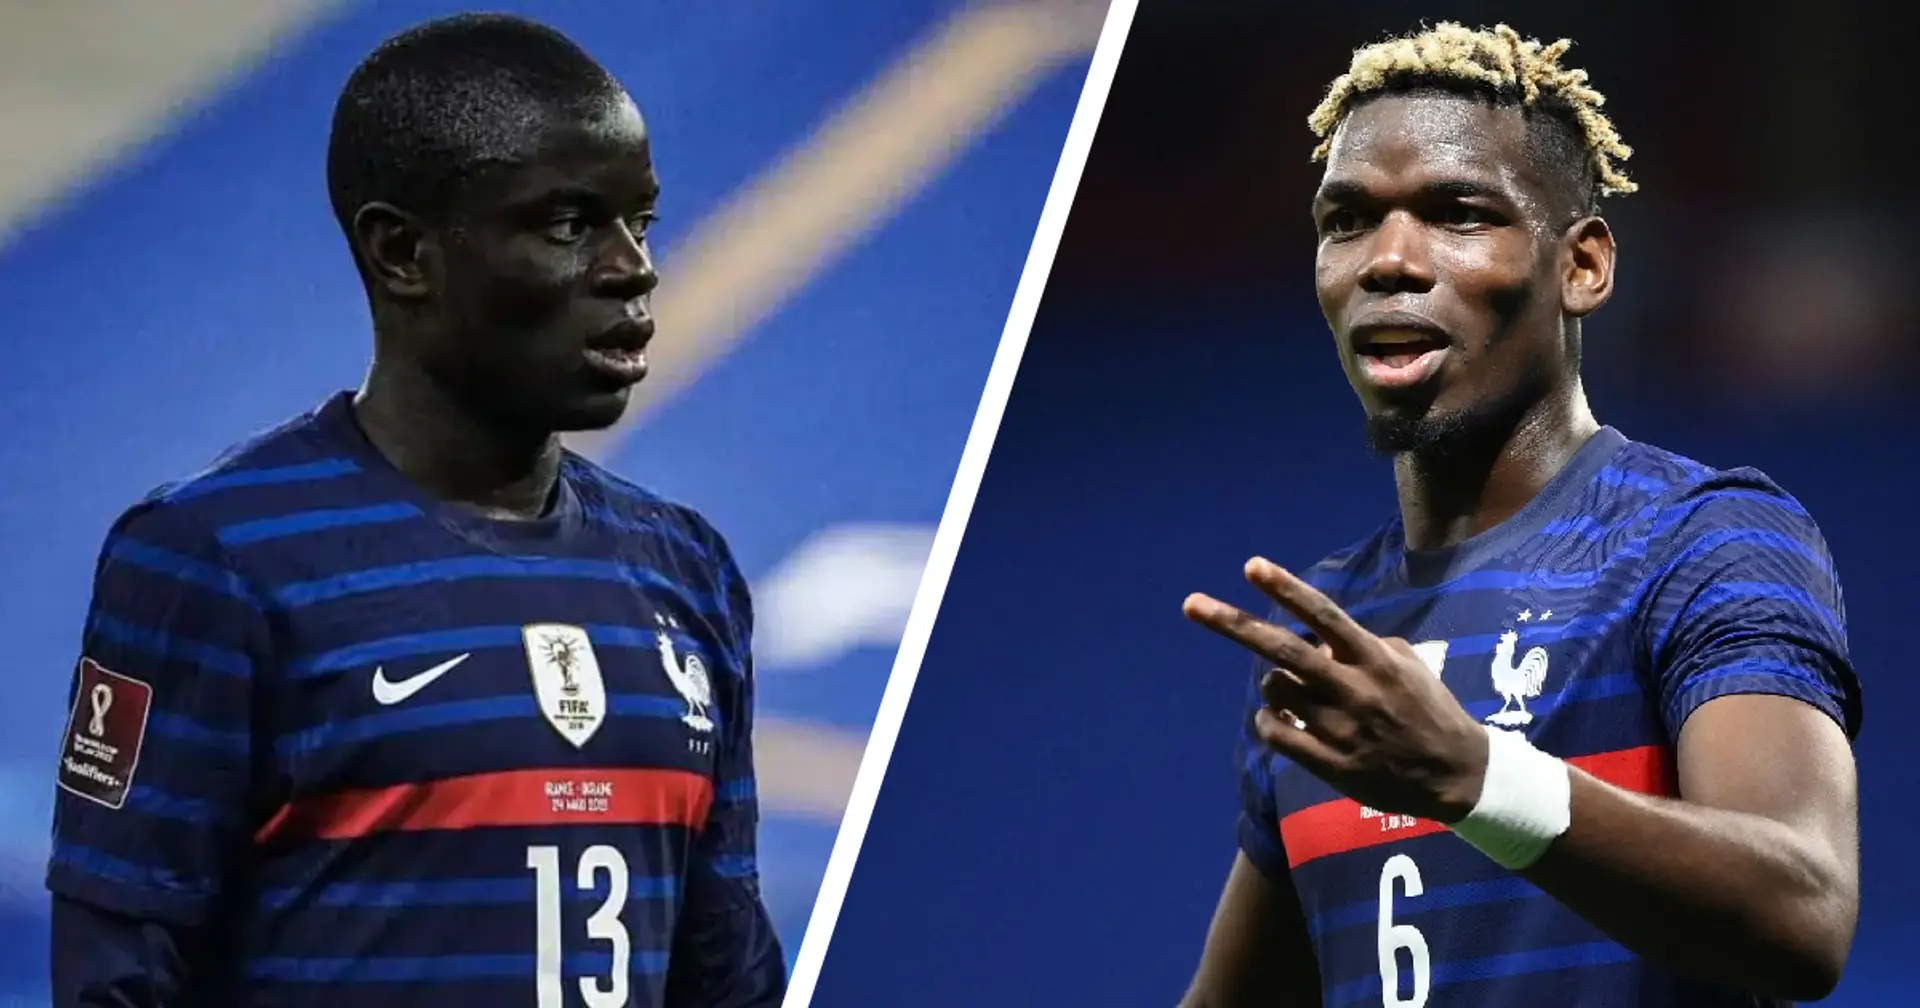 N'Golo Kante and Paul Pogba subjected to racist 'monkey' chants during France-Hungary draw